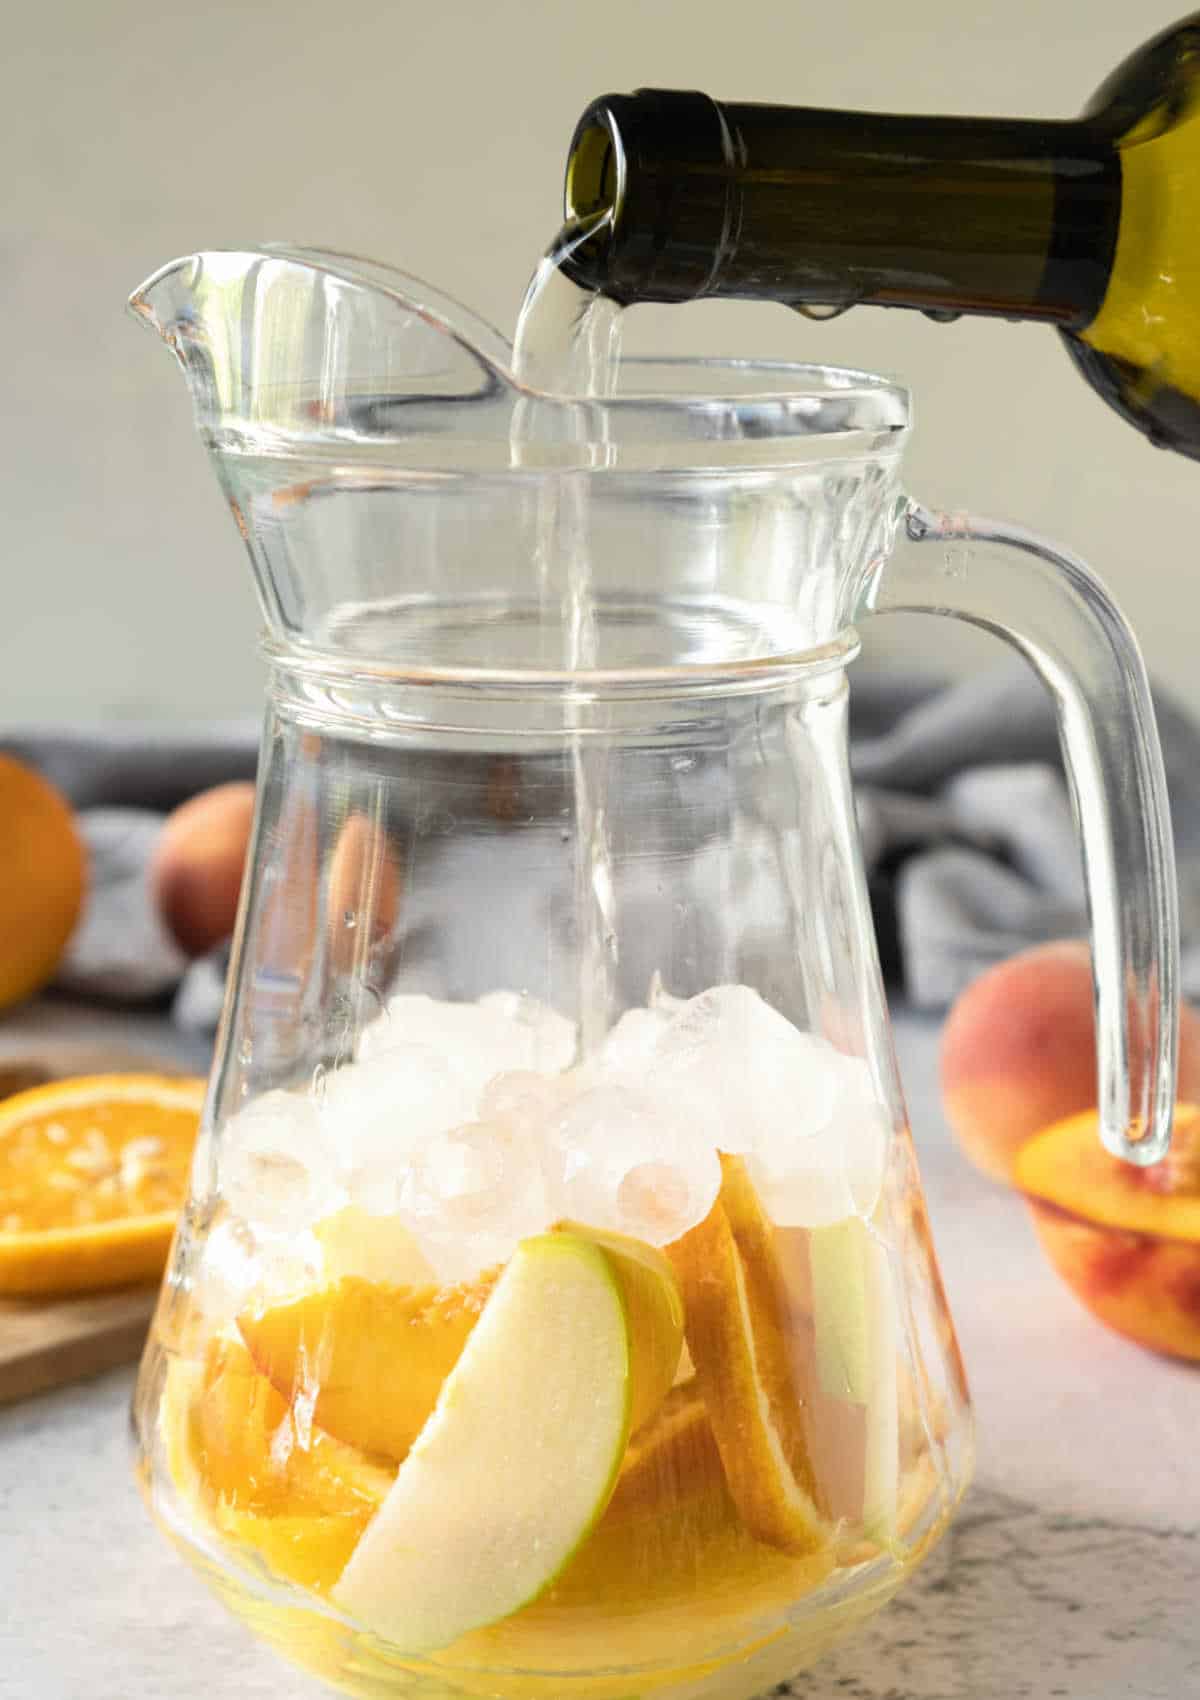 Pouring white wine from a bottle in a pitcher with ice and sliced fruit. Greyish background.